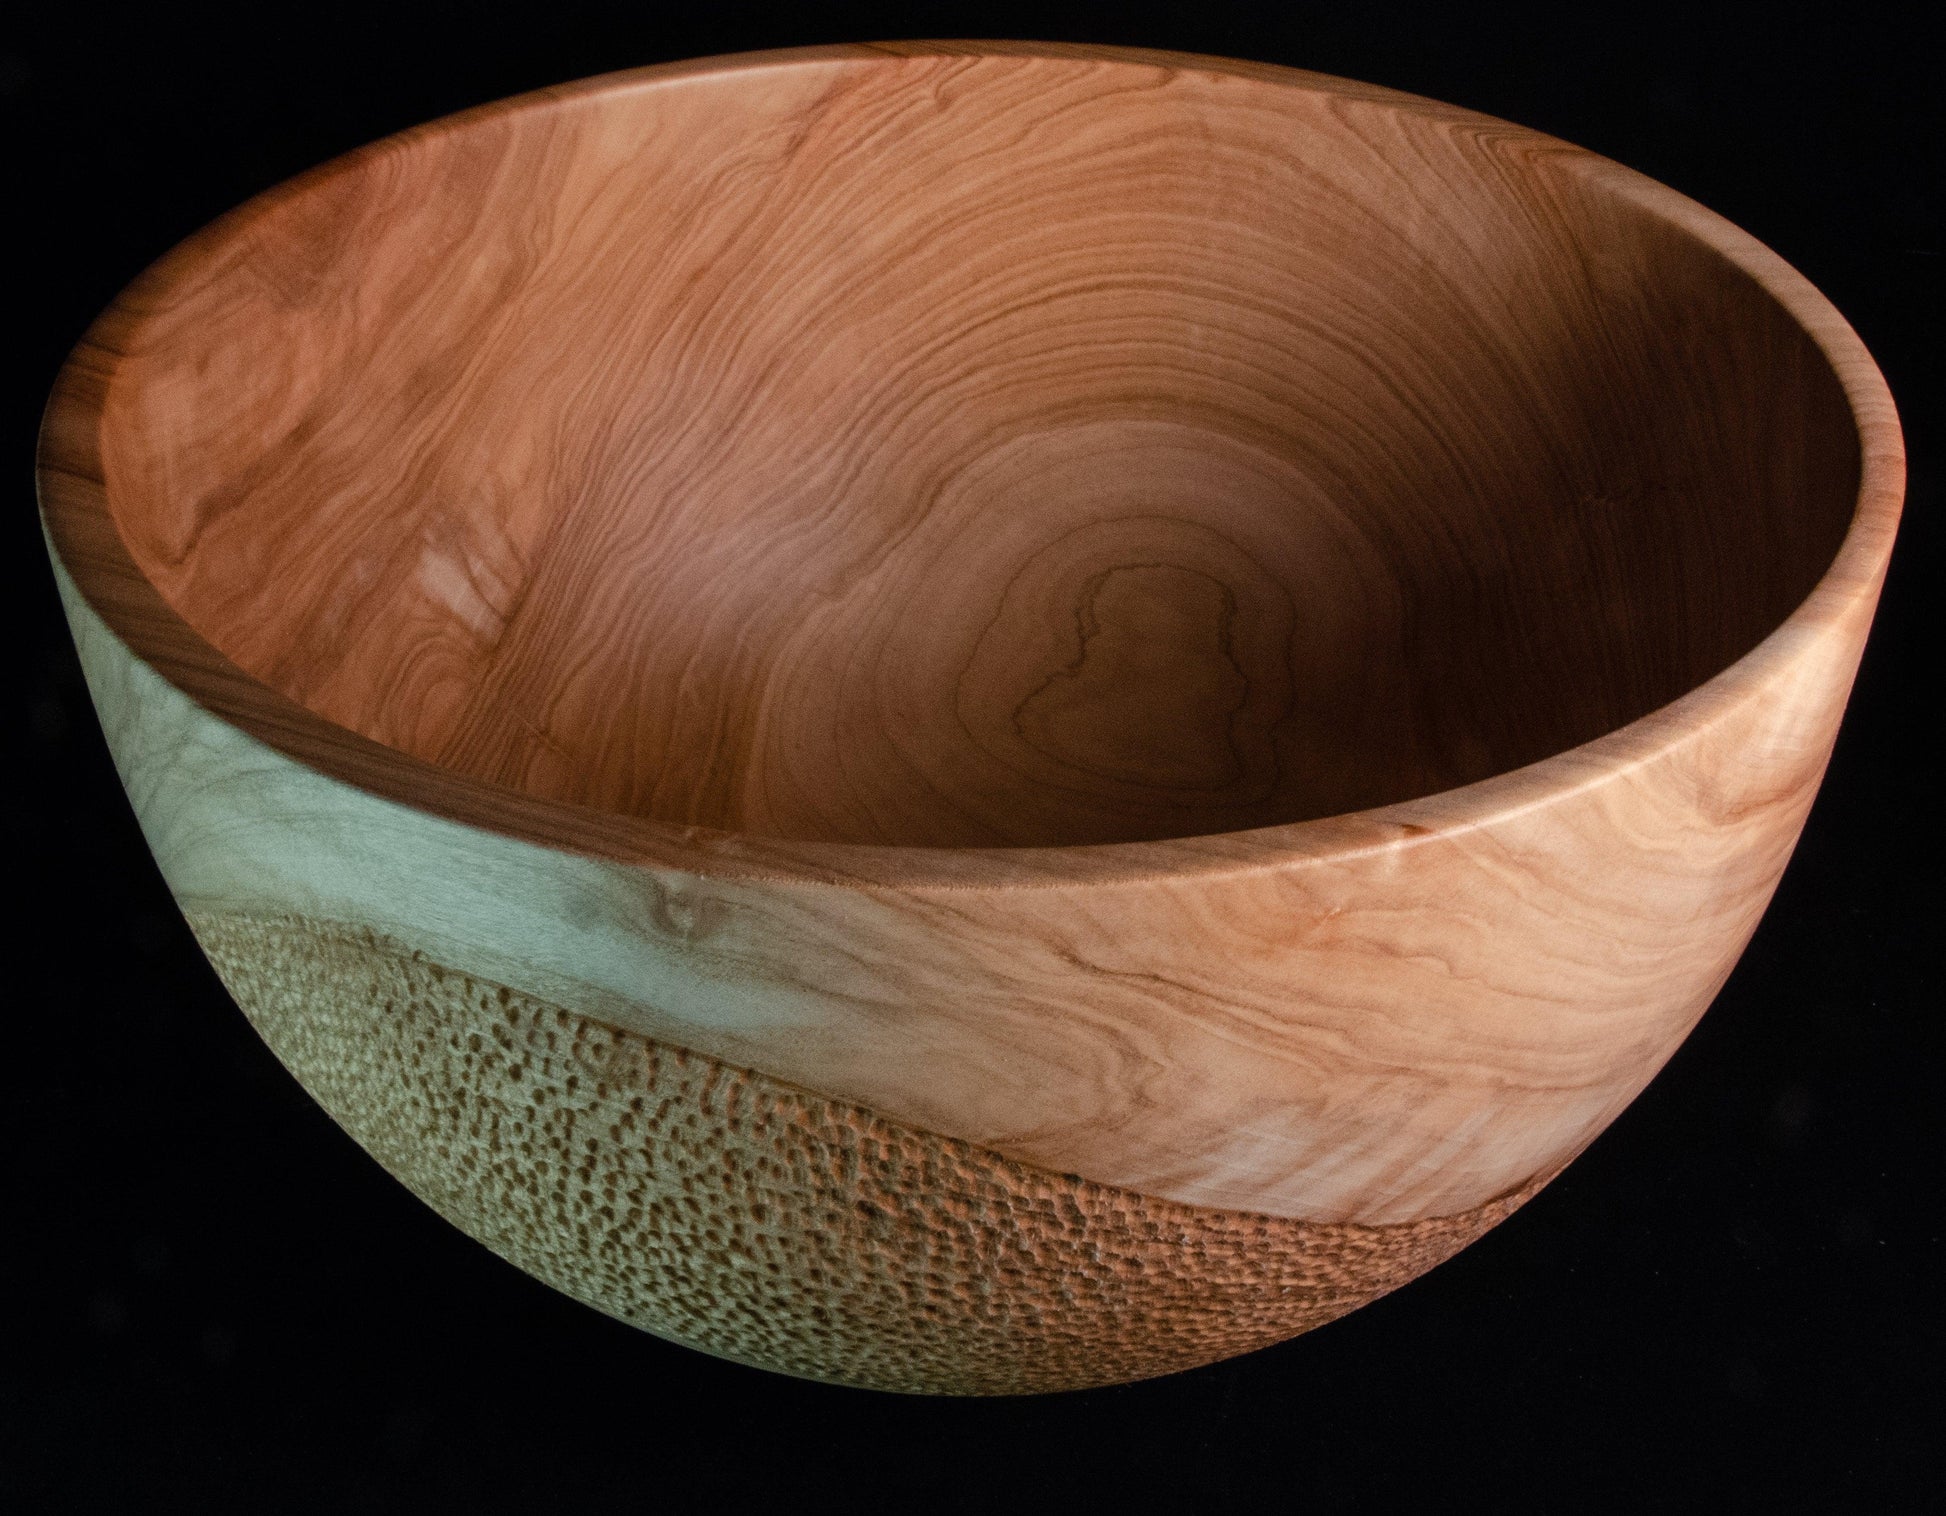 Large maple bowl with texturing - Rare Earth Bowls